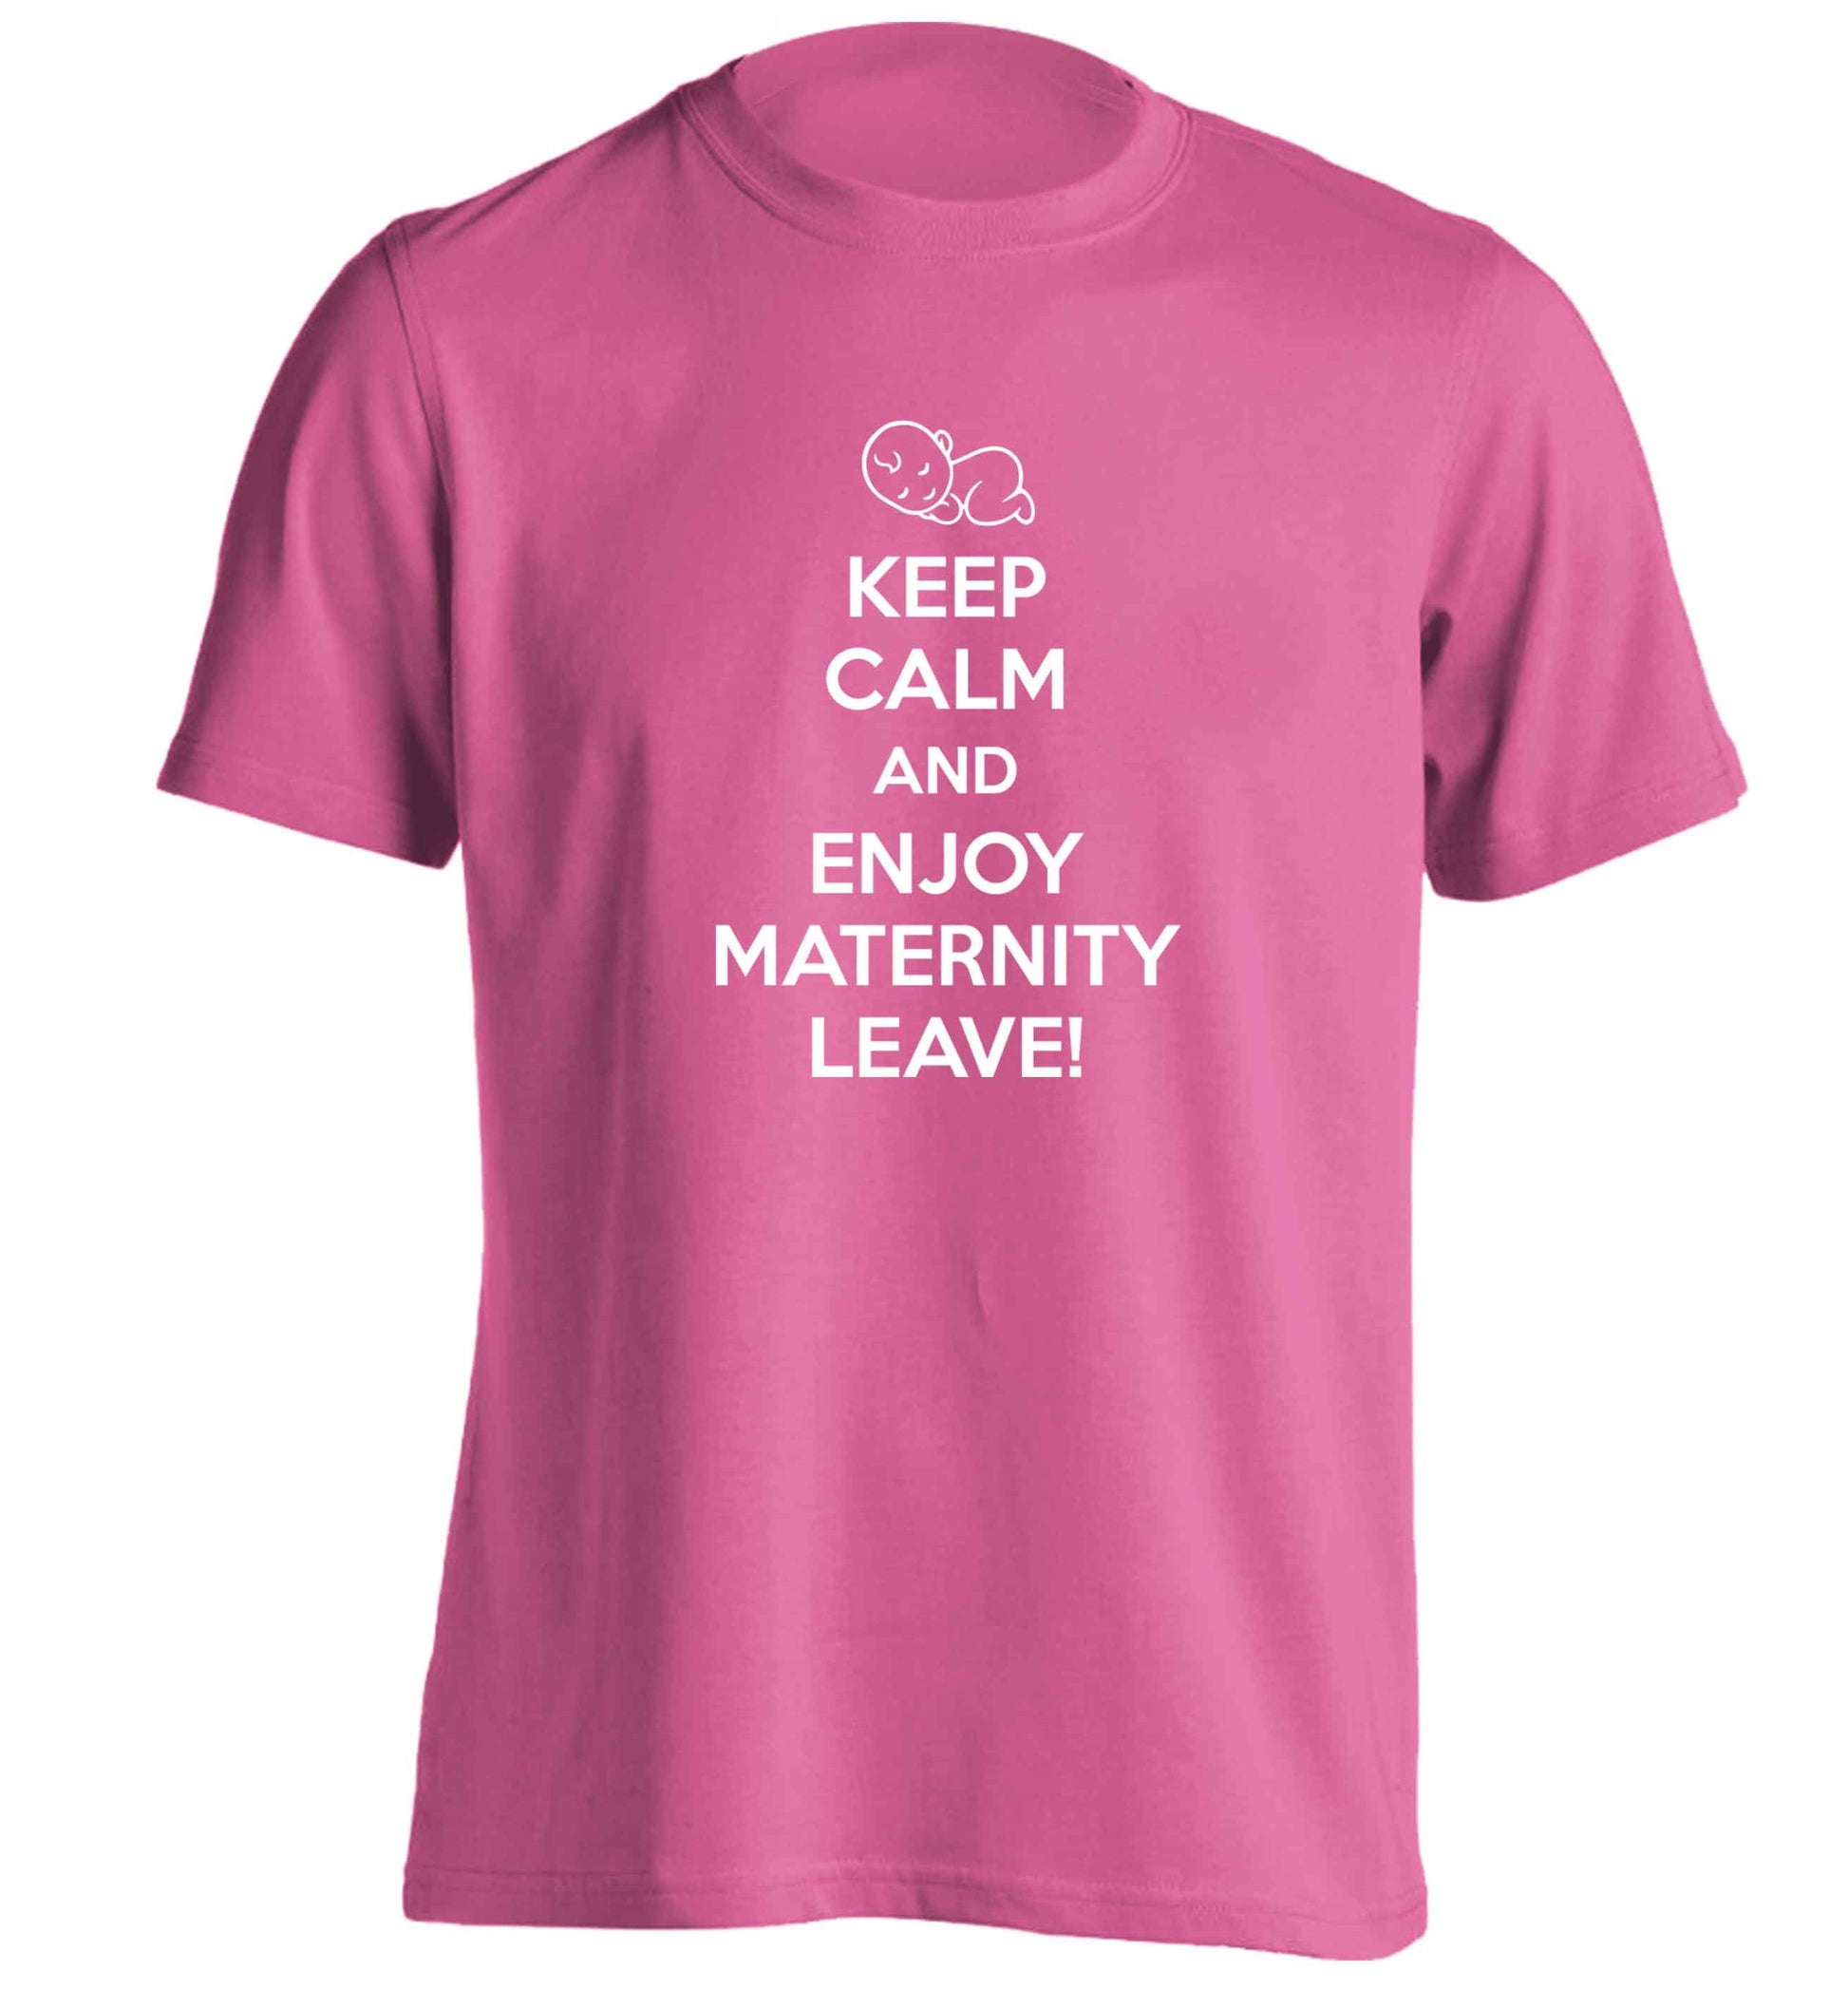 Keep calm and enjoy maternity leave adults unisex pink Tshirt 2XL